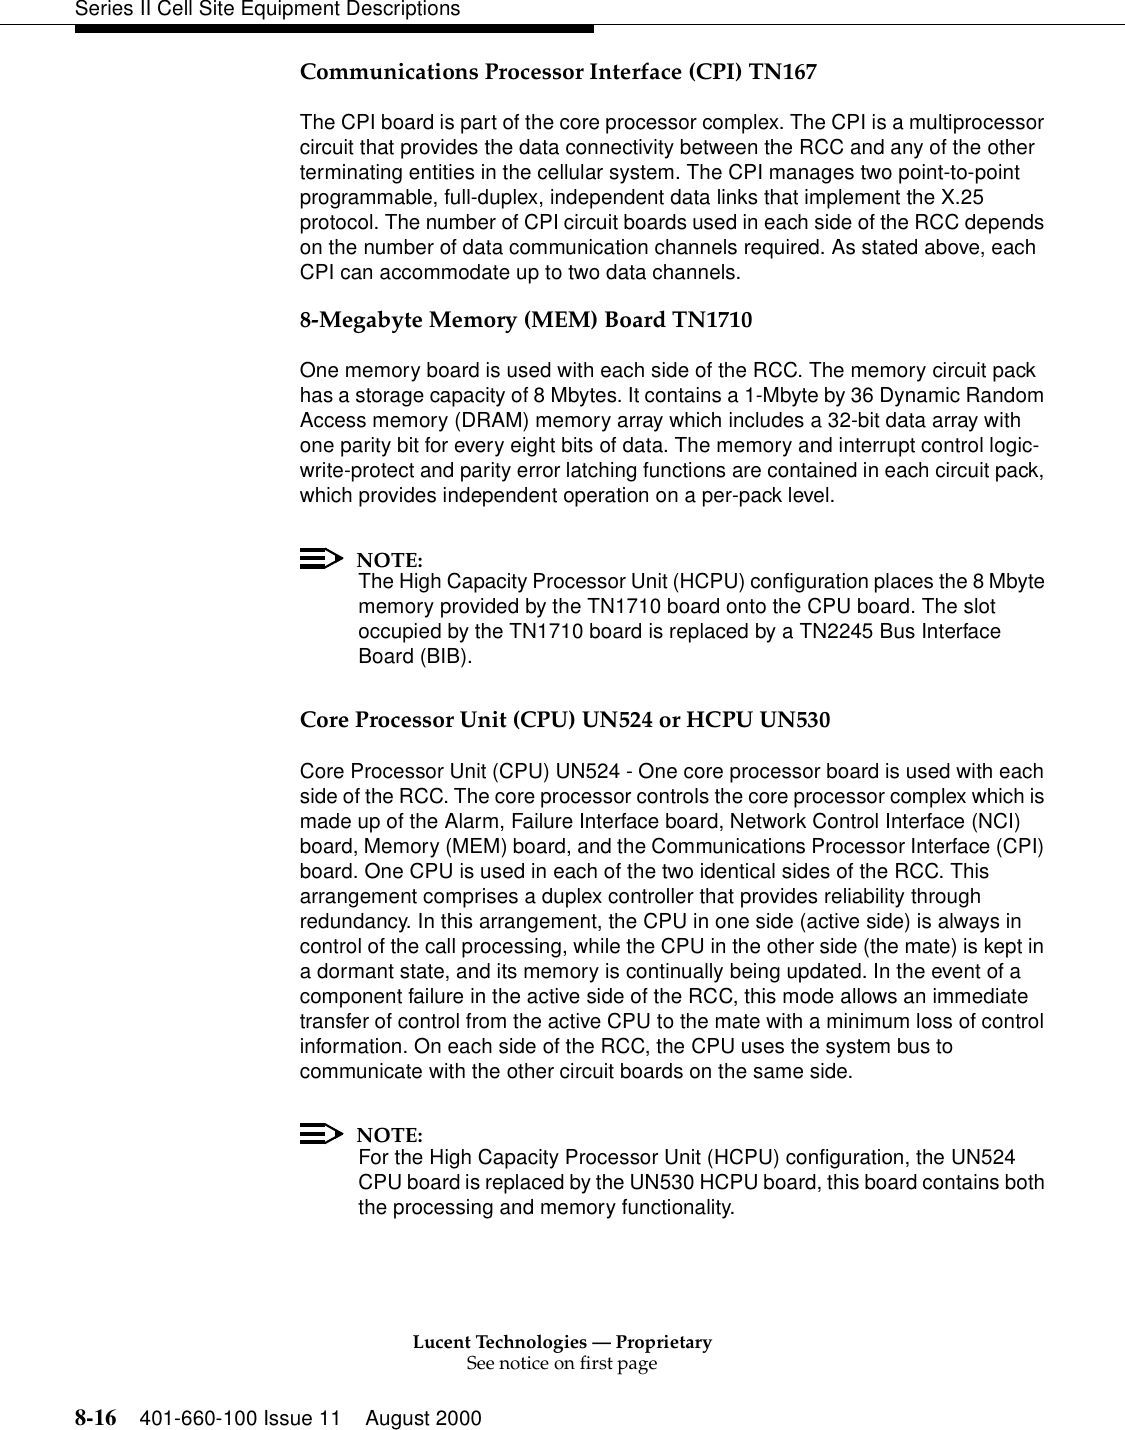 Lucent Technologies — ProprietarySee notice on first page8-16 401-660-100 Issue 11 August 2000Series II Cell Site Equipment DescriptionsCommunications Processor Interface (CPI) TN167The CPI board is part of the core processor complex. The CPI is a multiprocessor circuit that provides the data connectivity between the RCC and any of the other terminating entities in the cellular system. The CPI manages two point-to-point programmable, full-duplex, independent data links that implement the X.25 protocol. The number of CPI circuit boards used in each side of the RCC depends on the number of data communication channels required. As stated above, each CPI can accommodate up to two data channels. 8-Megabyte Memory (MEM) Board TN1710One memory board is used with each side of the RCC. The memory circuit pack has a storage capacity of 8 Mbytes. It contains a 1-Mbyte by 36 Dynamic Random Access memory (DRAM) memory array which includes a 32-bit data array with one parity bit for every eight bits of data. The memory and interrupt control logic-write-protect and parity error latching functions are contained in each circuit pack, which provides independent operation on a per-pack level. NOTE:The High Capacity Processor Unit (HCPU) configuration places the 8 Mbyte memory provided by the TN1710 board onto the CPU board. The slot occupied by the TN1710 board is replaced by a TN2245 Bus Interface Board (BIB).Core Processor Unit (CPU) UN524 or HCPU UN530Core Processor Unit (CPU) UN524 - One core processor board is used with each side of the RCC. The core processor controls the core processor complex which is made up of the Alarm, Failure Interface board, Network Control Interface (NCI) board, Memory (MEM) board, and the Communications Processor Interface (CPI) board. One CPU is used in each of the two identical sides of the RCC. This arrangement comprises a duplex controller that provides reliability through redundancy. In this arrangement, the CPU in one side (active side) is always in control of the call processing, while the CPU in the other side (the mate) is kept in a dormant state, and its memory is continually being updated. In the event of a component failure in the active side of the RCC, this mode allows an immediate transfer of control from the active CPU to the mate with a minimum loss of control information. On each side of the RCC, the CPU uses the system bus to communicate with the other circuit boards on the same side. NOTE:For the High Capacity Processor Unit (HCPU) configuration, the UN524 CPU board is replaced by the UN530 HCPU board, this board contains both the processing and memory functionality.